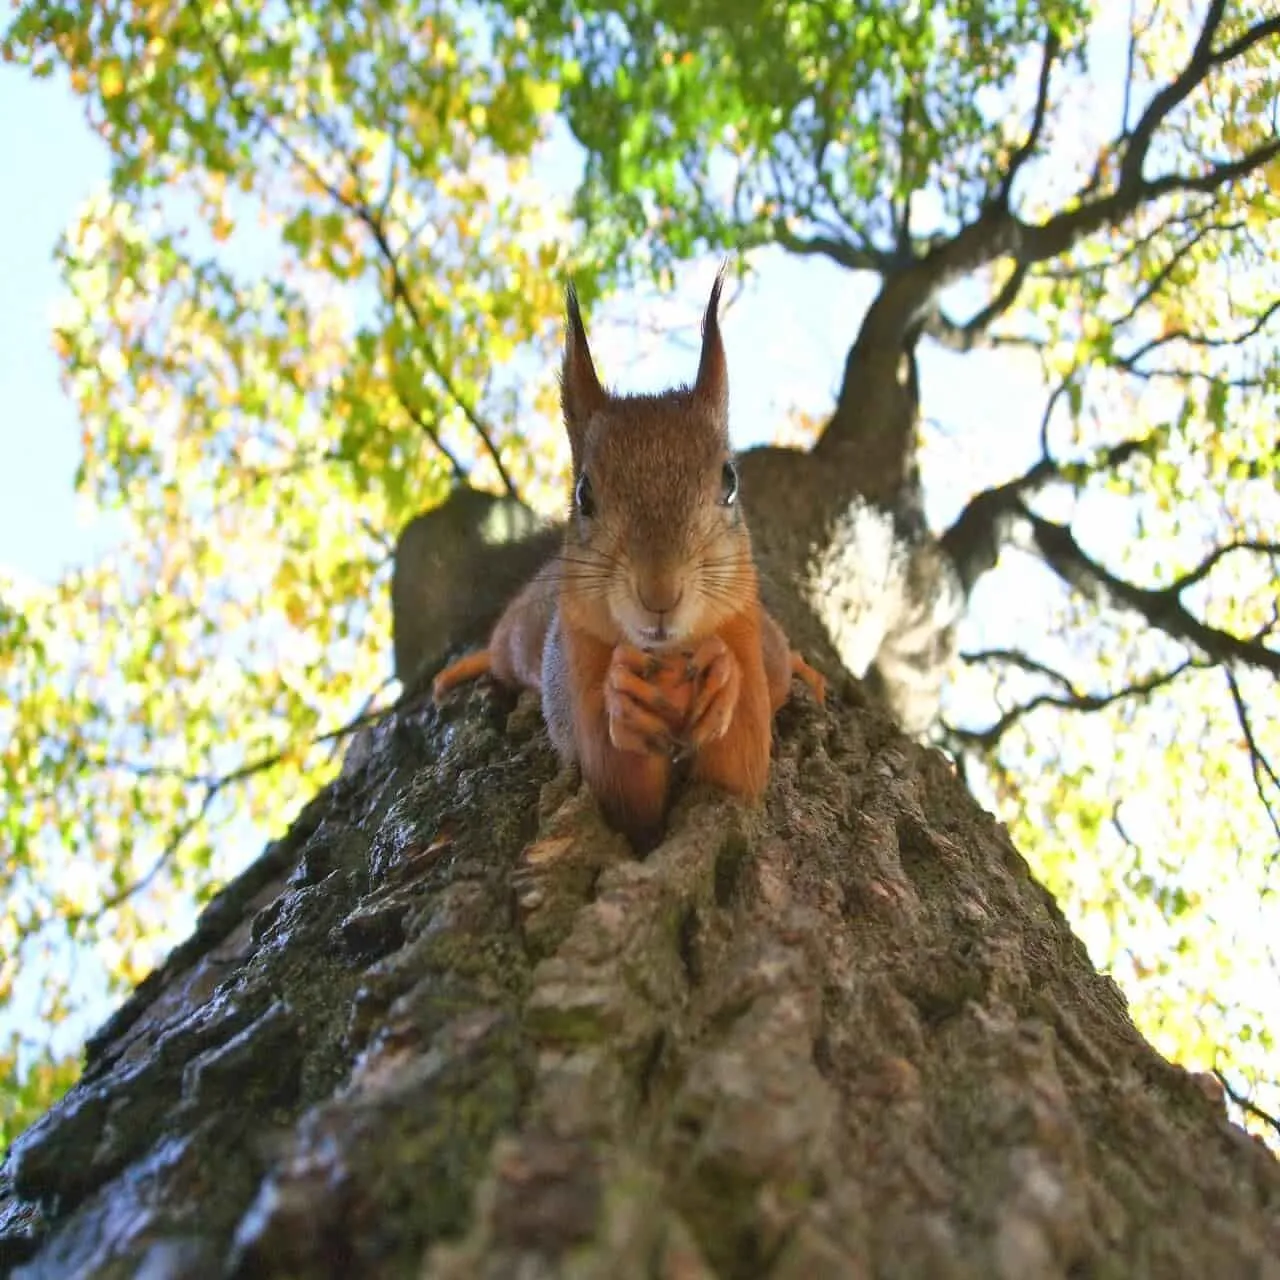 Red squirrels are interesting as well as adorable.